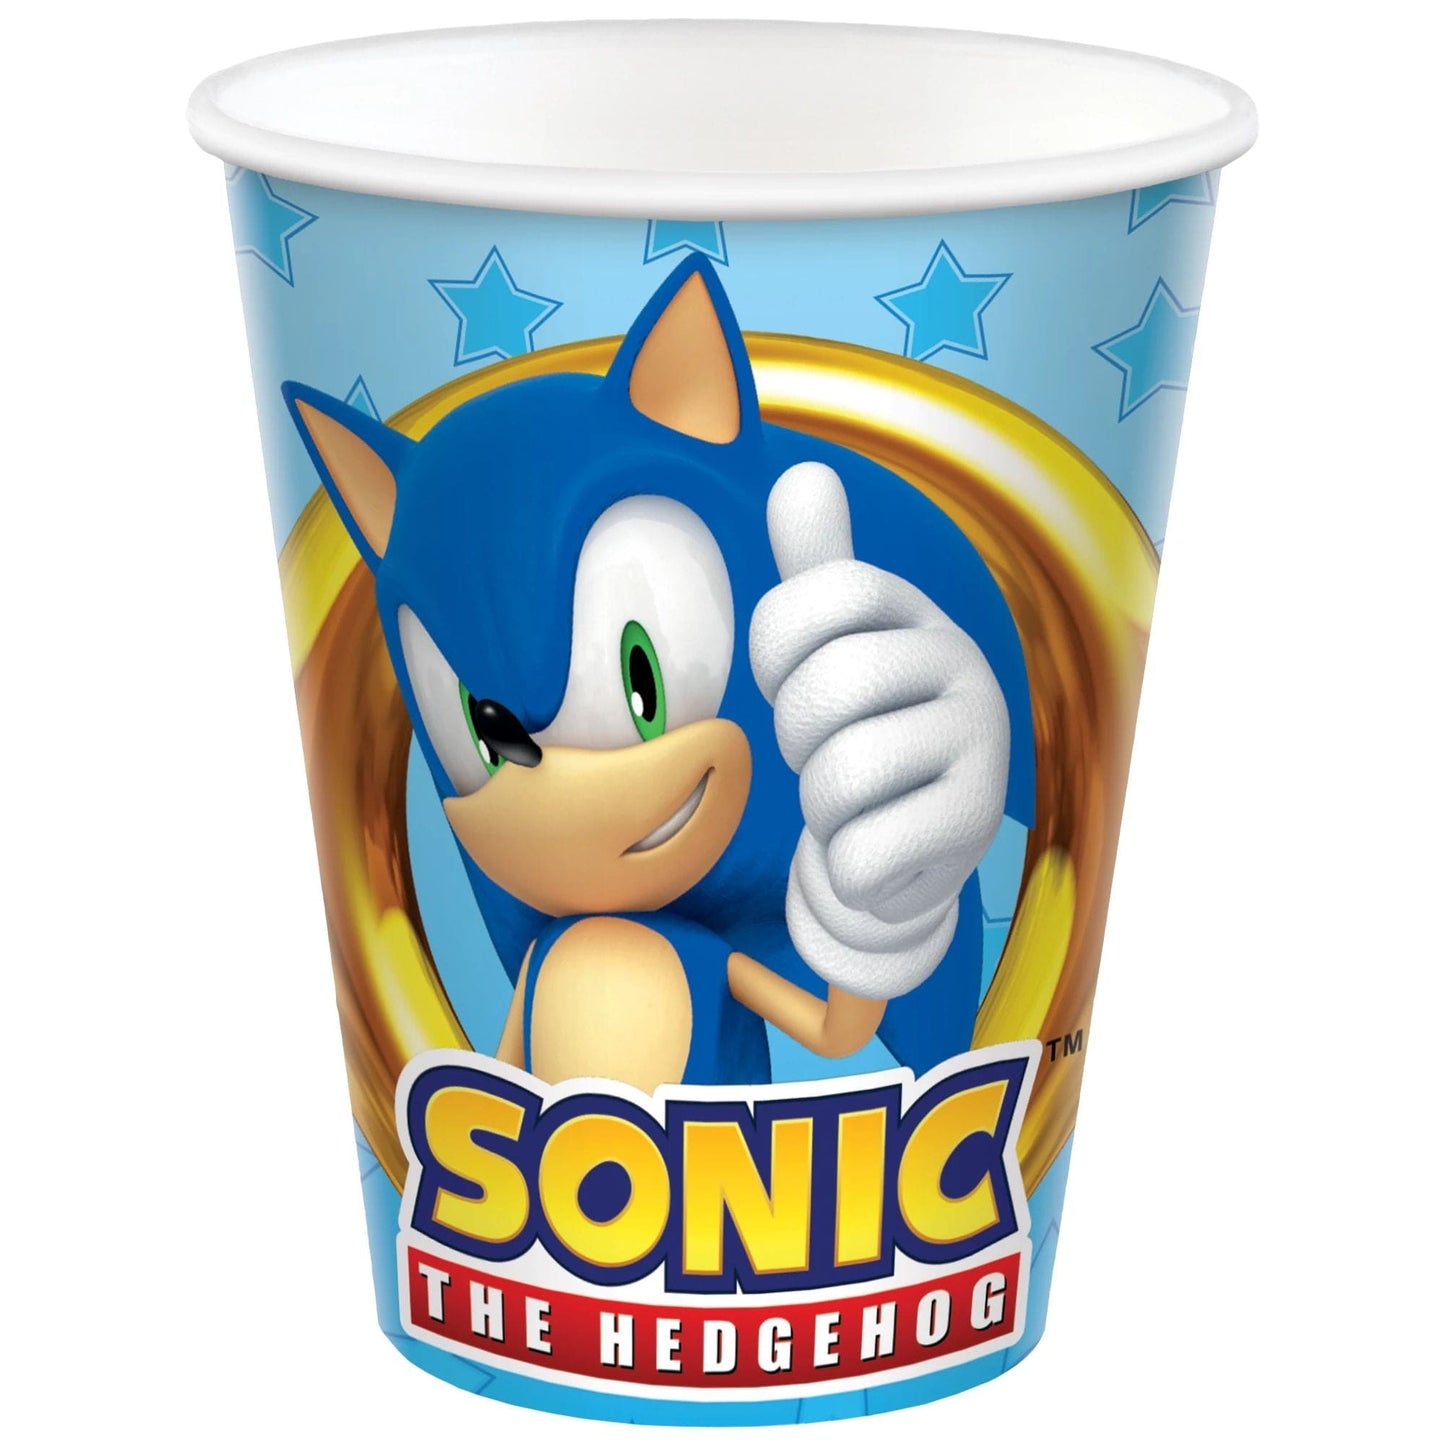 Sonic The Hedgehog 9oz Hot and Cold Paper Cup